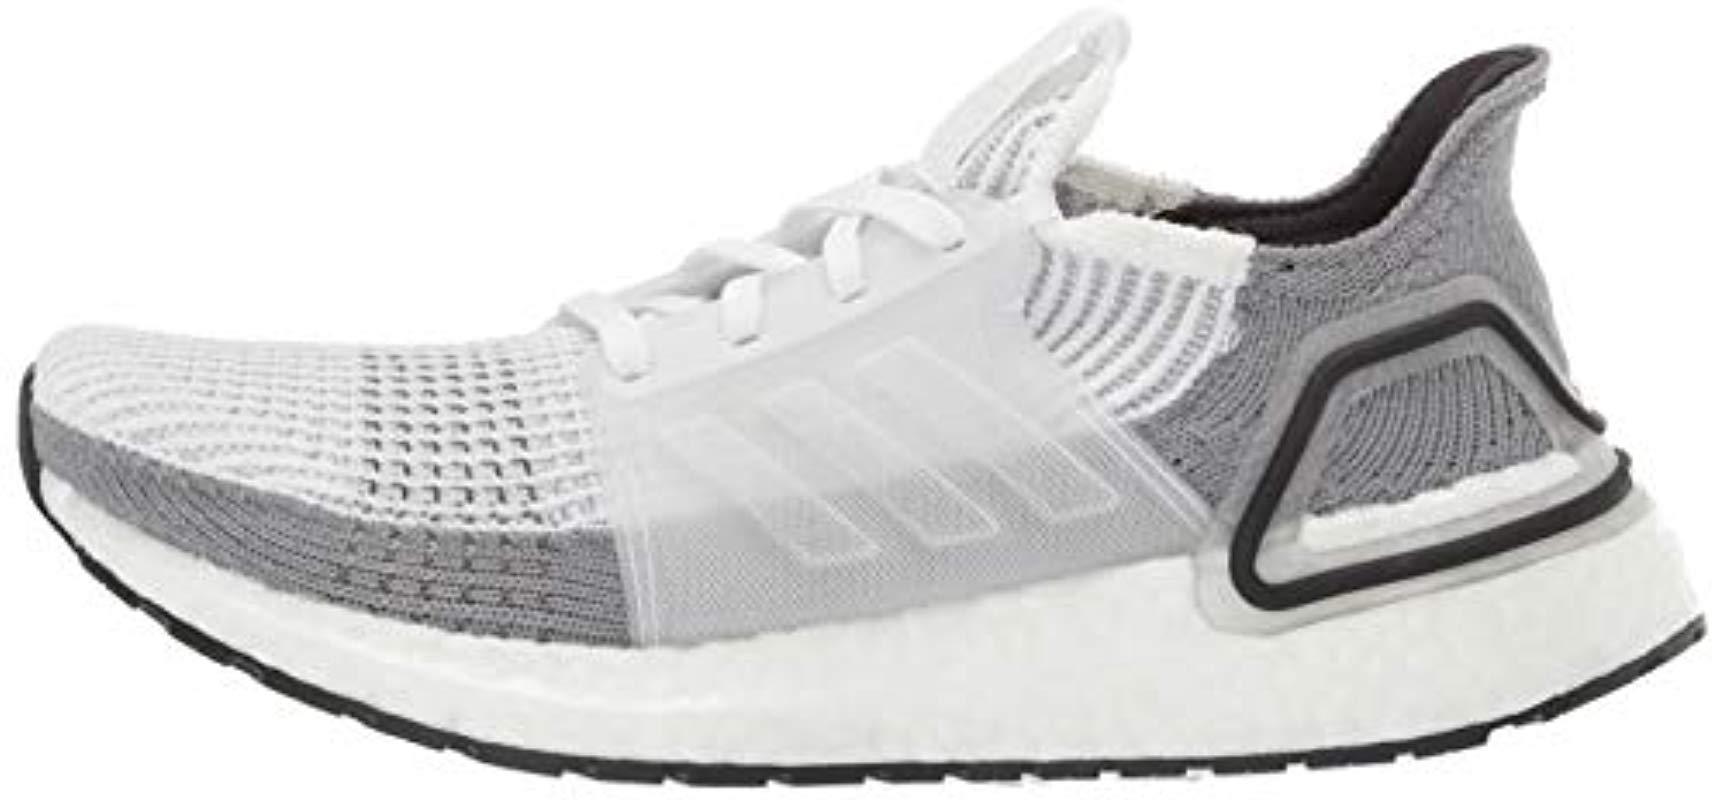 adidas Synthetic Ultraboost 19 in (White) Lyst